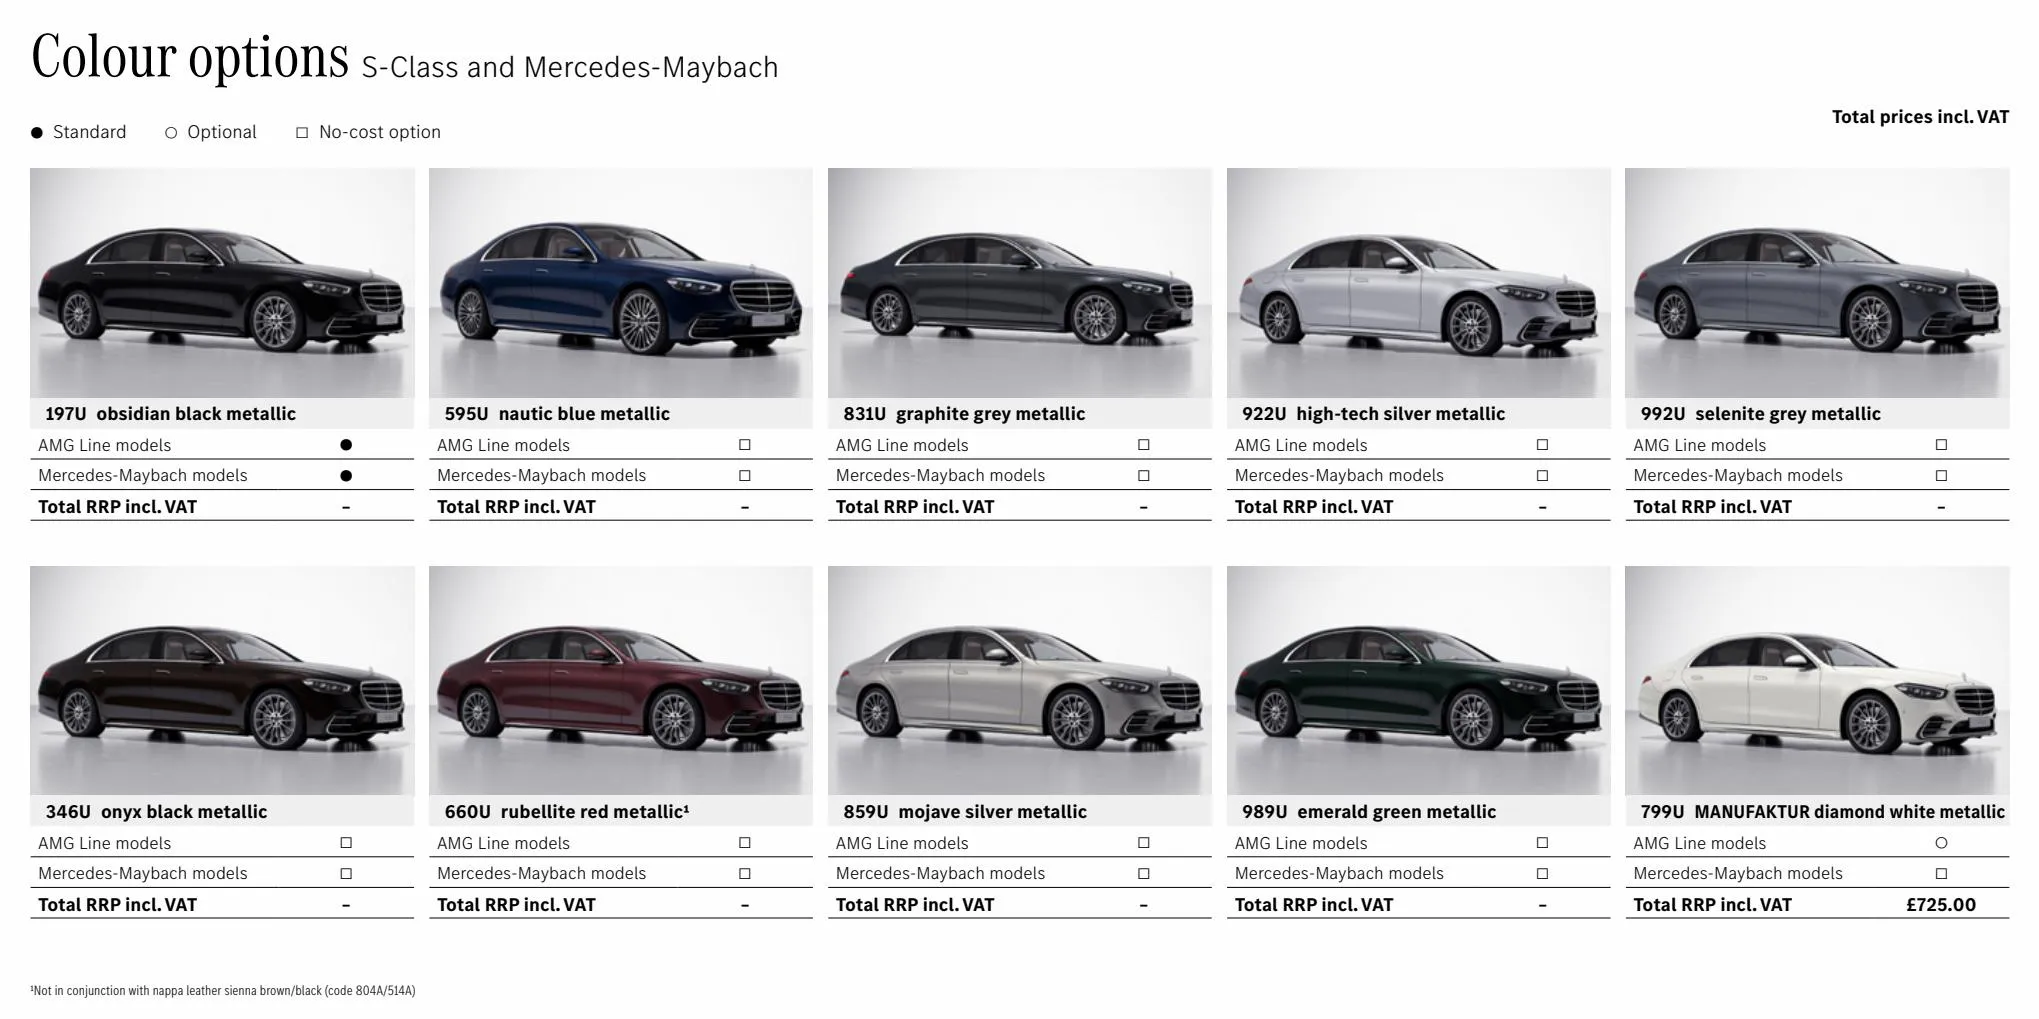 Catalogue The S-Class and Mercedes-Maybach S-Class, page 00041